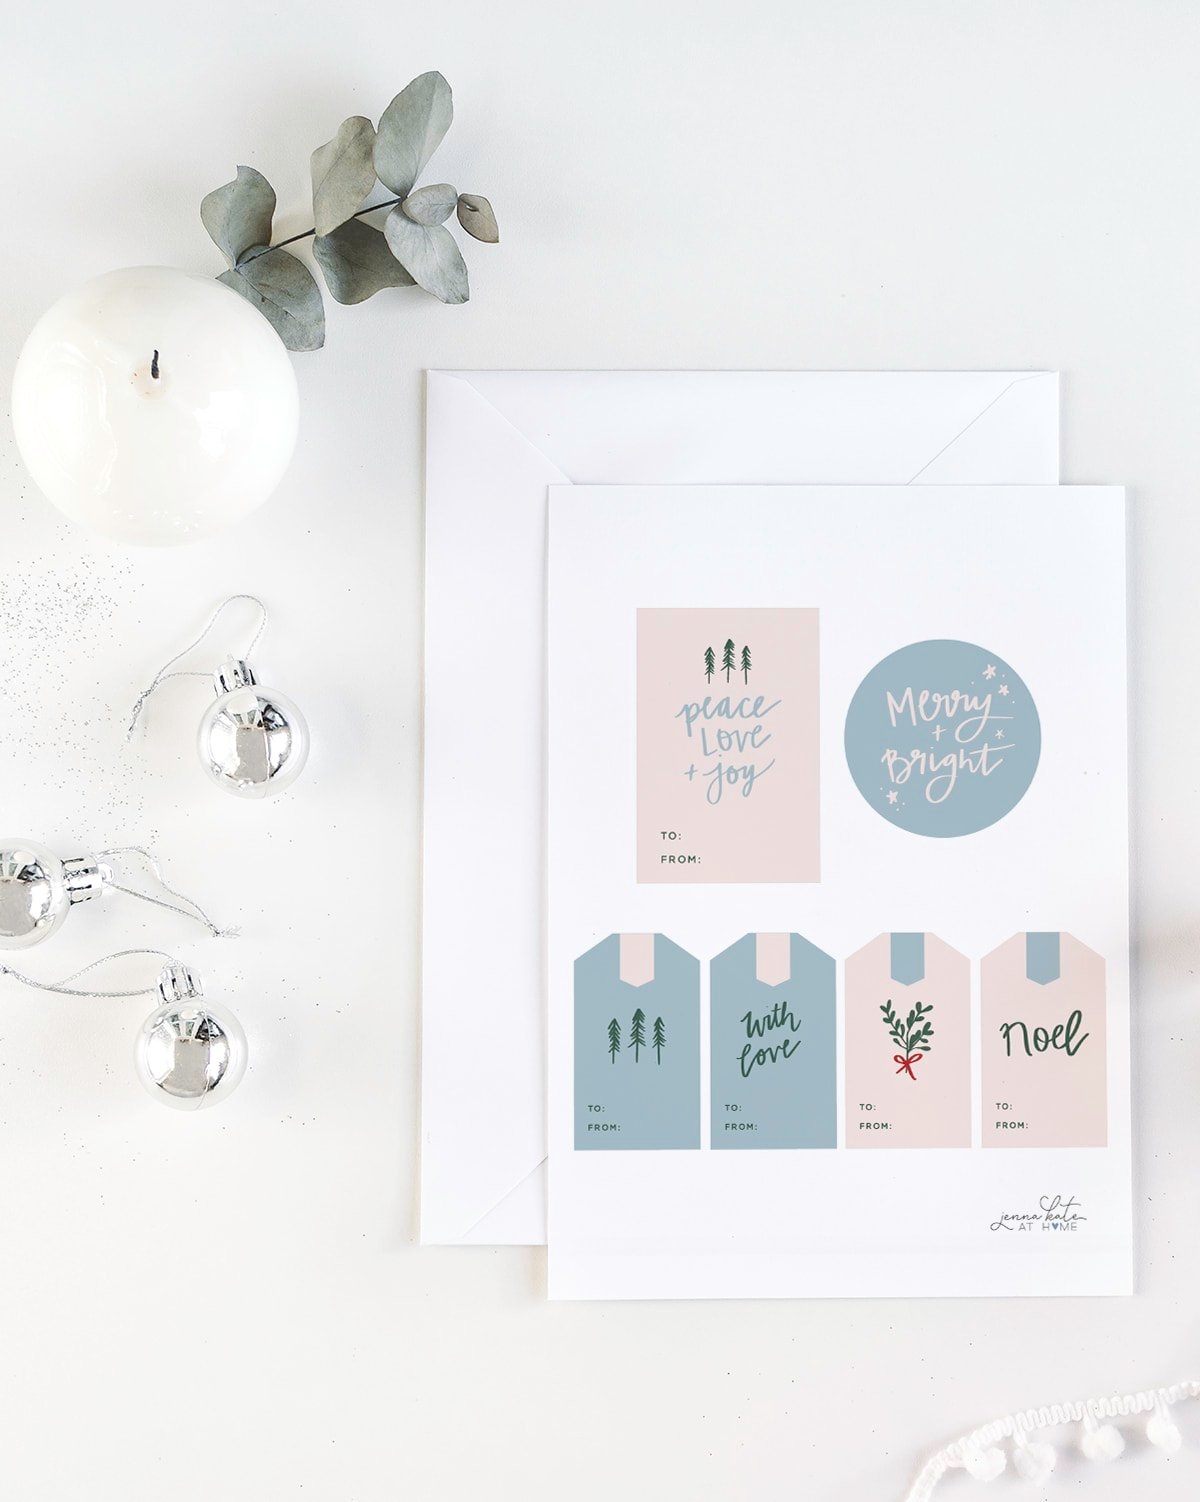 Make your gifts extra special this Christmas with these free printable gift tags